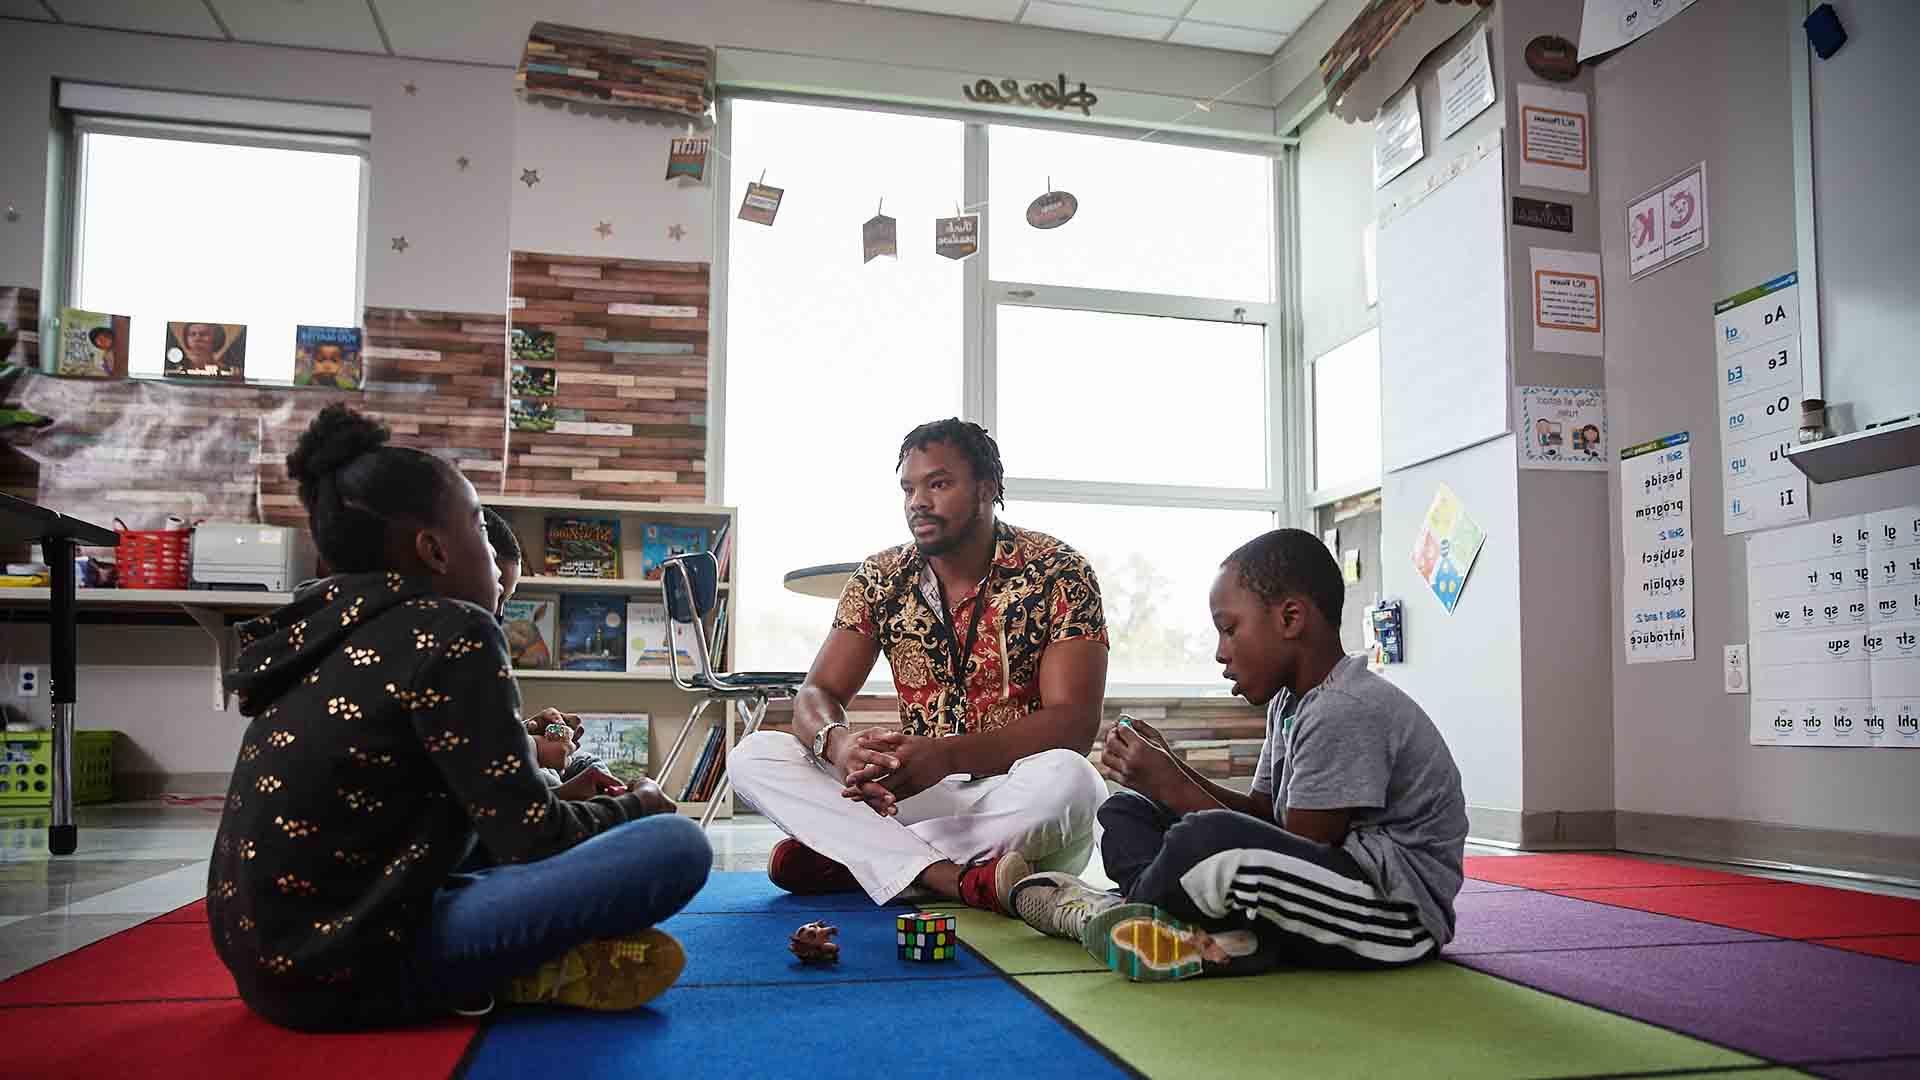 A School of Social Work student sits on the floor of a colorful classroom, talking to two young children.